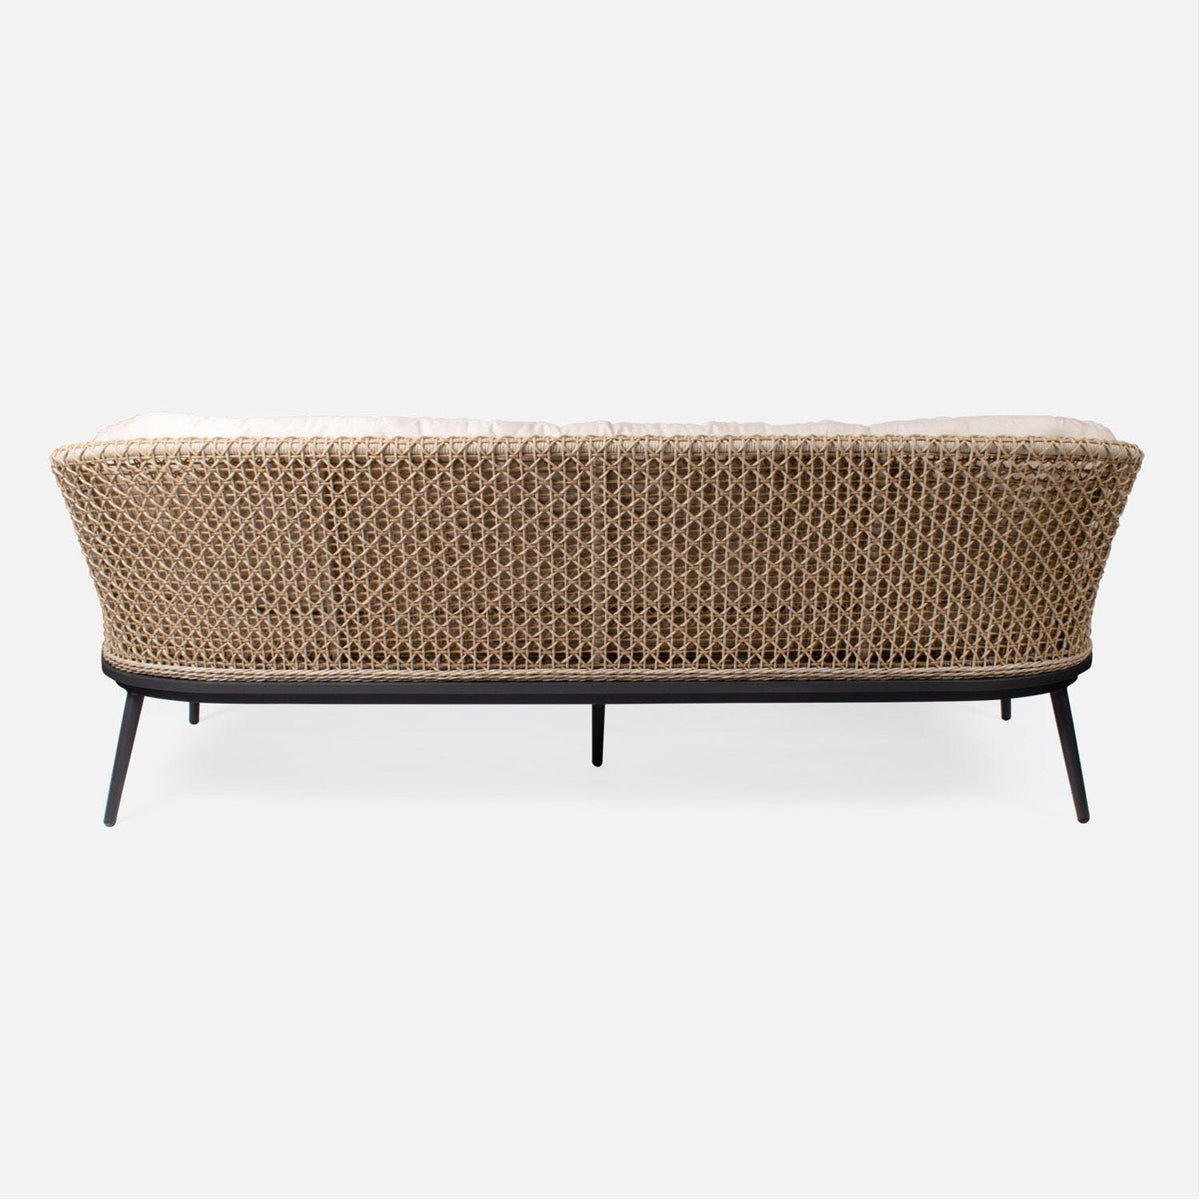 Made Goods Leandre Barrel Woven Outdoor Sofa in Pagua Fabric